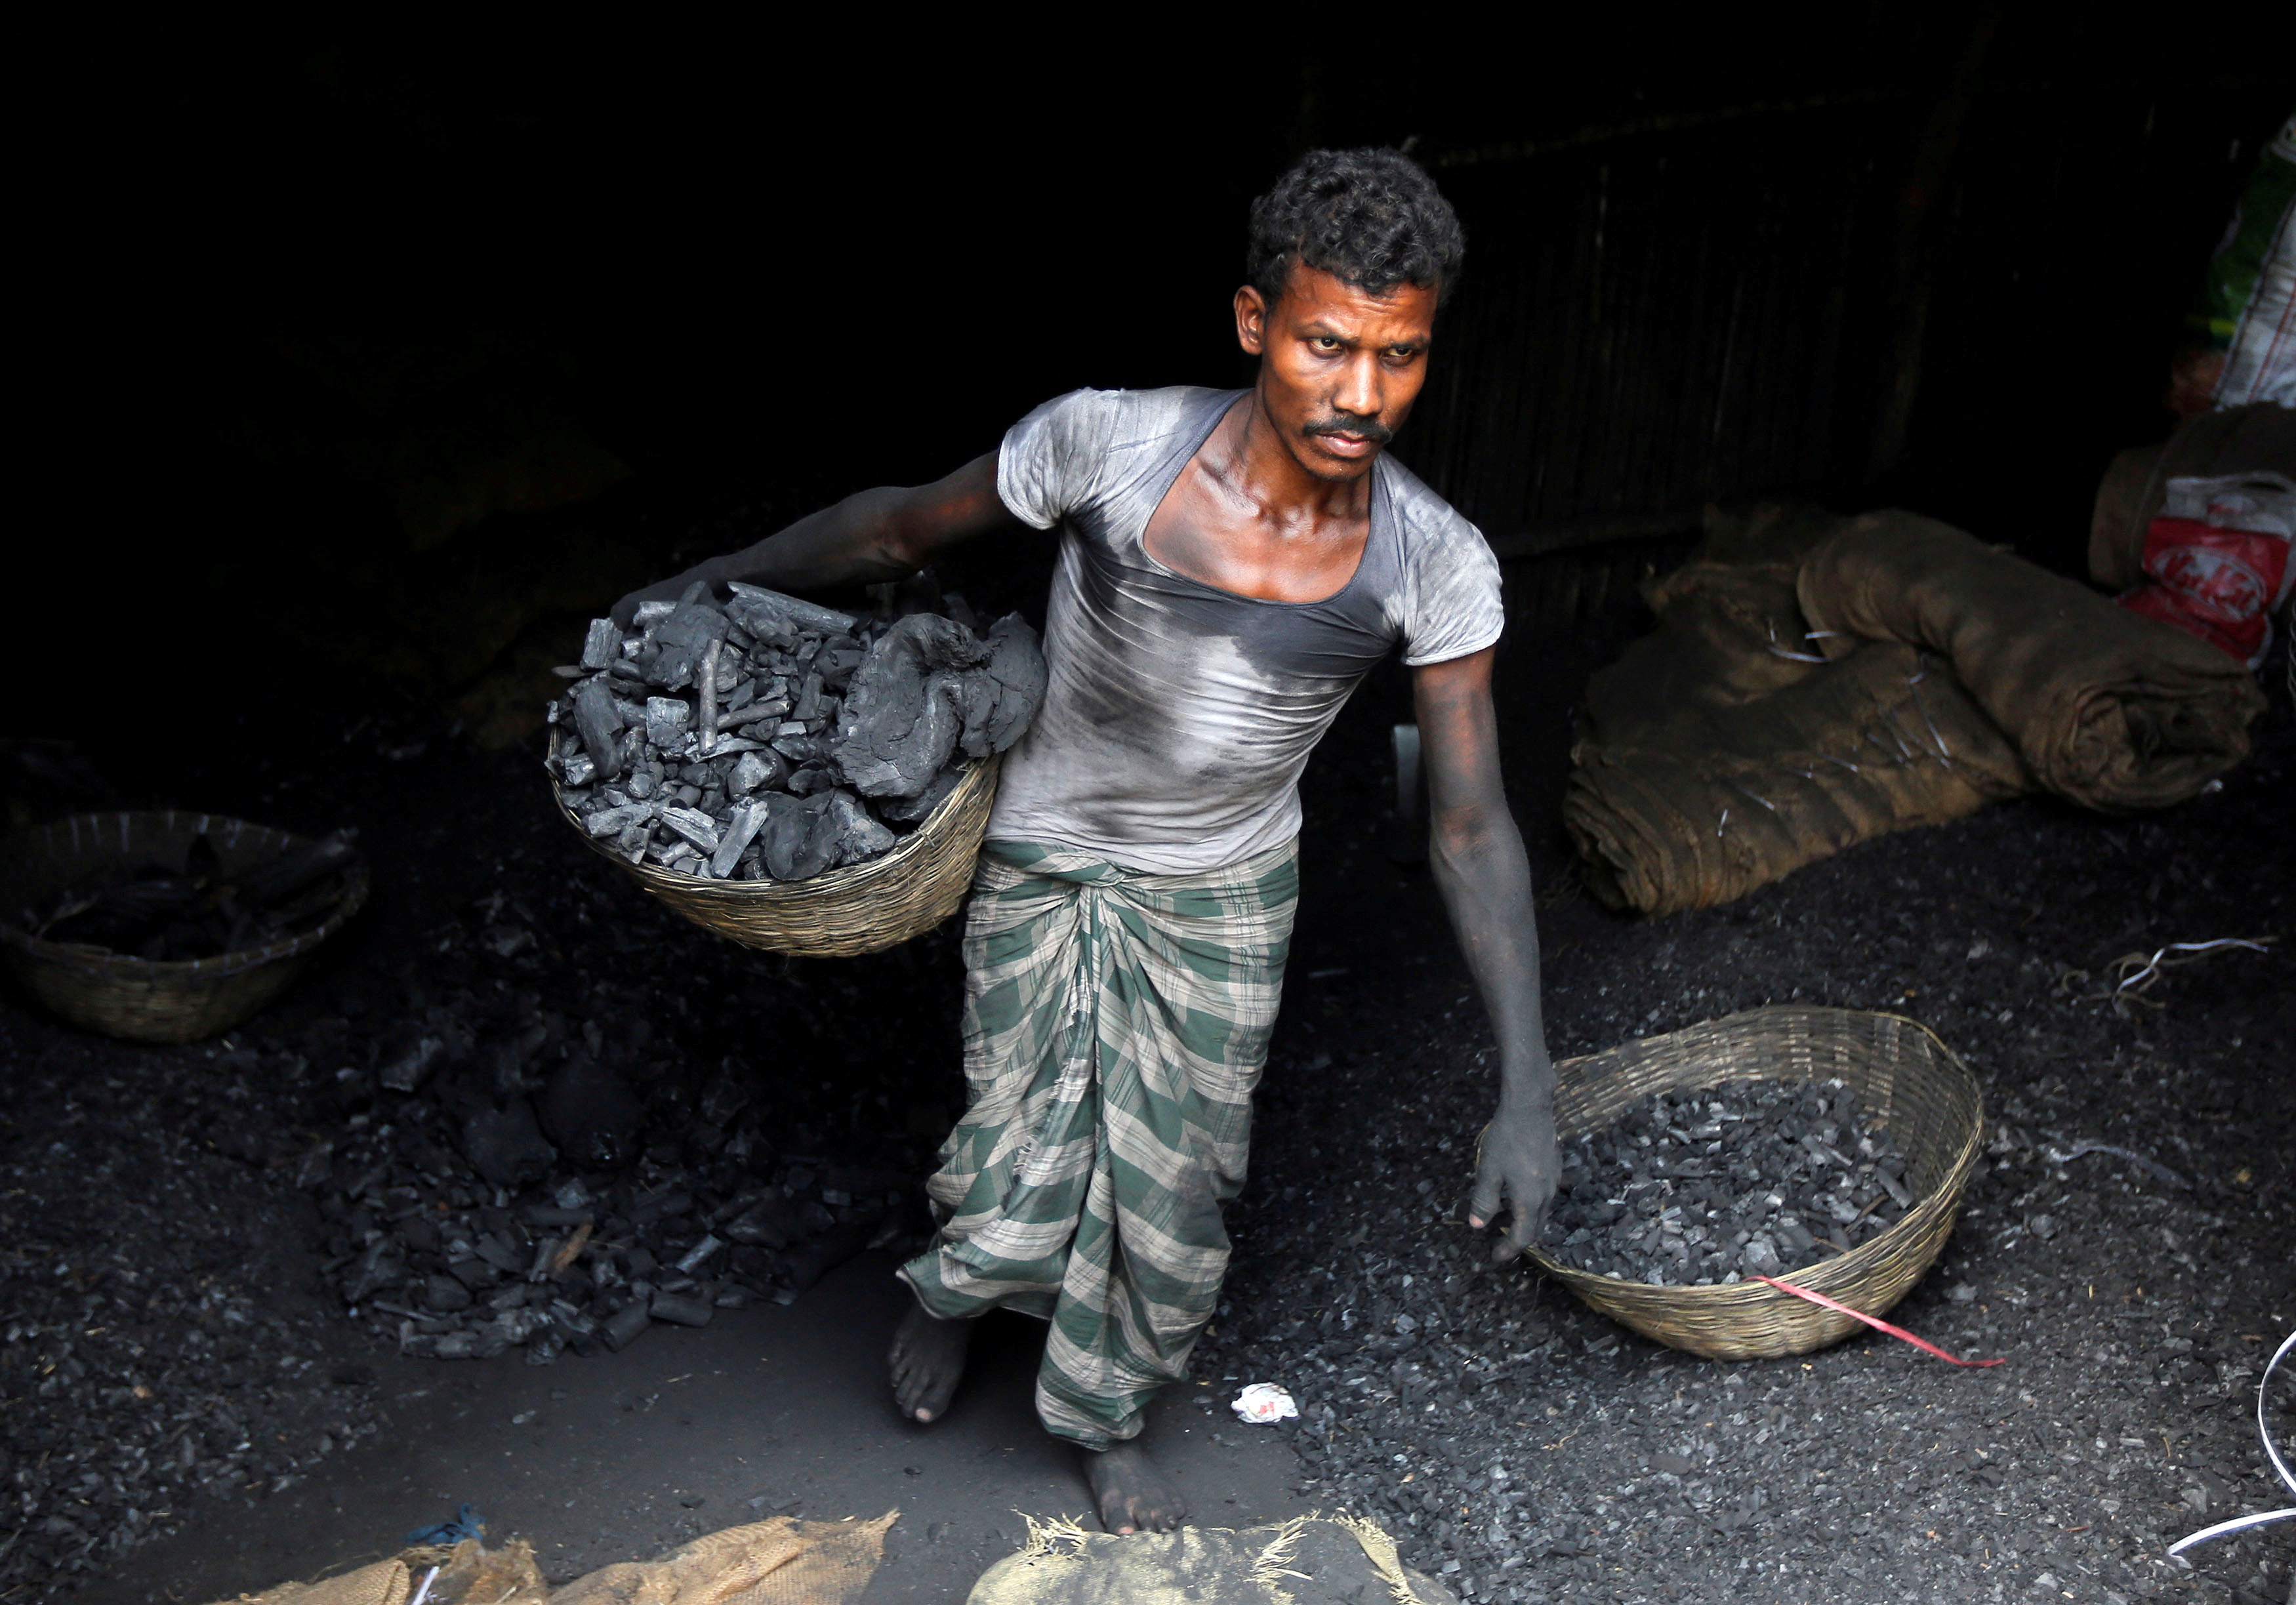 A worker carries coal in a basket in a industrial area in Mumbai